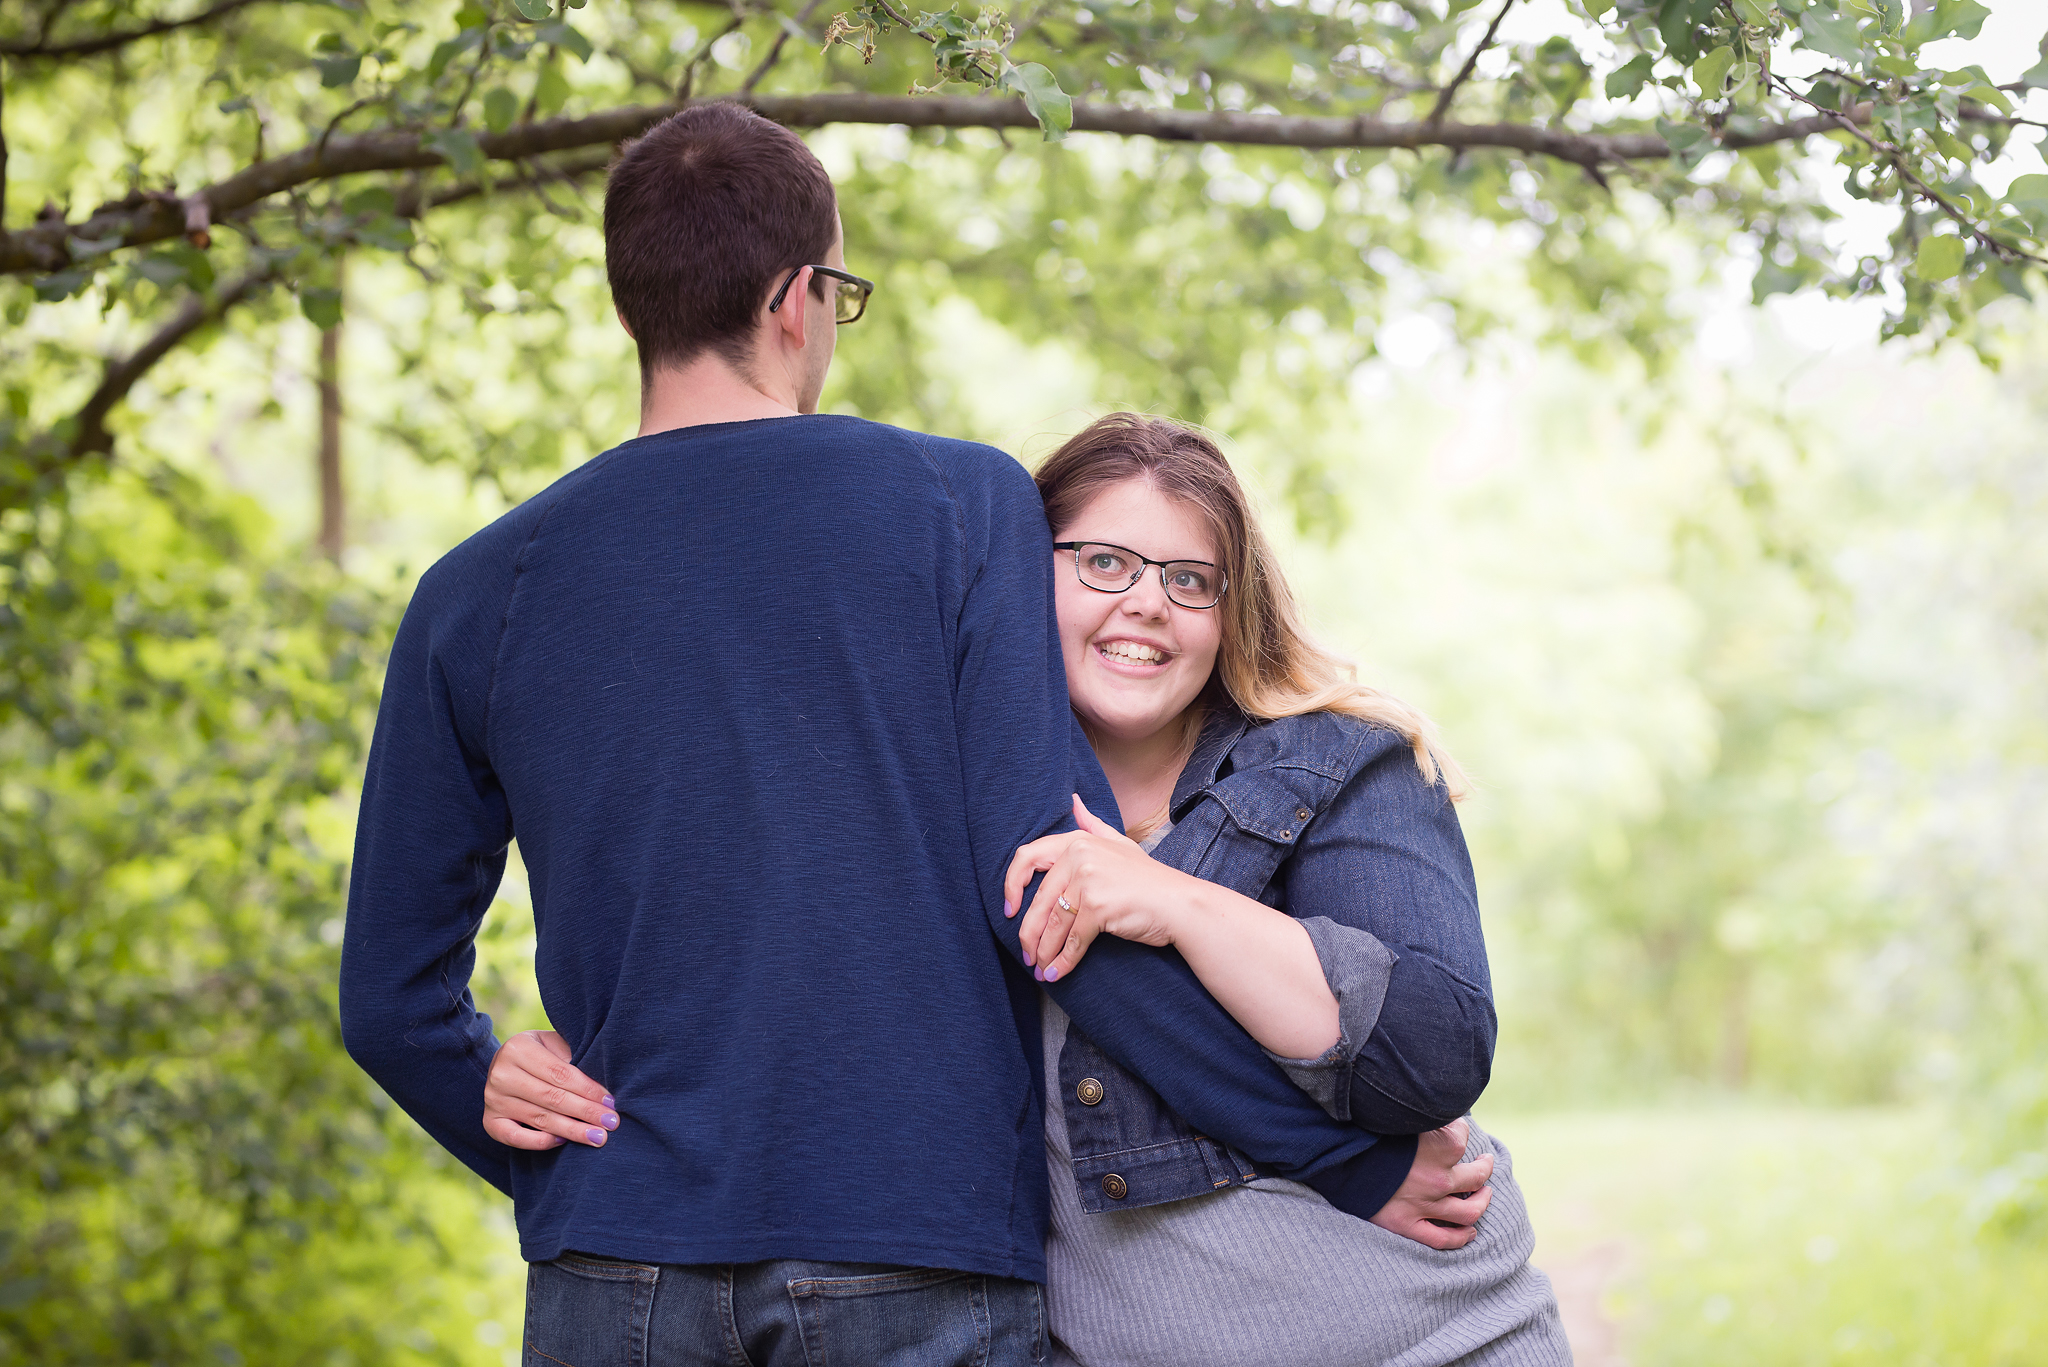 Couples192NaomiLuciennePhotography062018-2-Edit.jpg